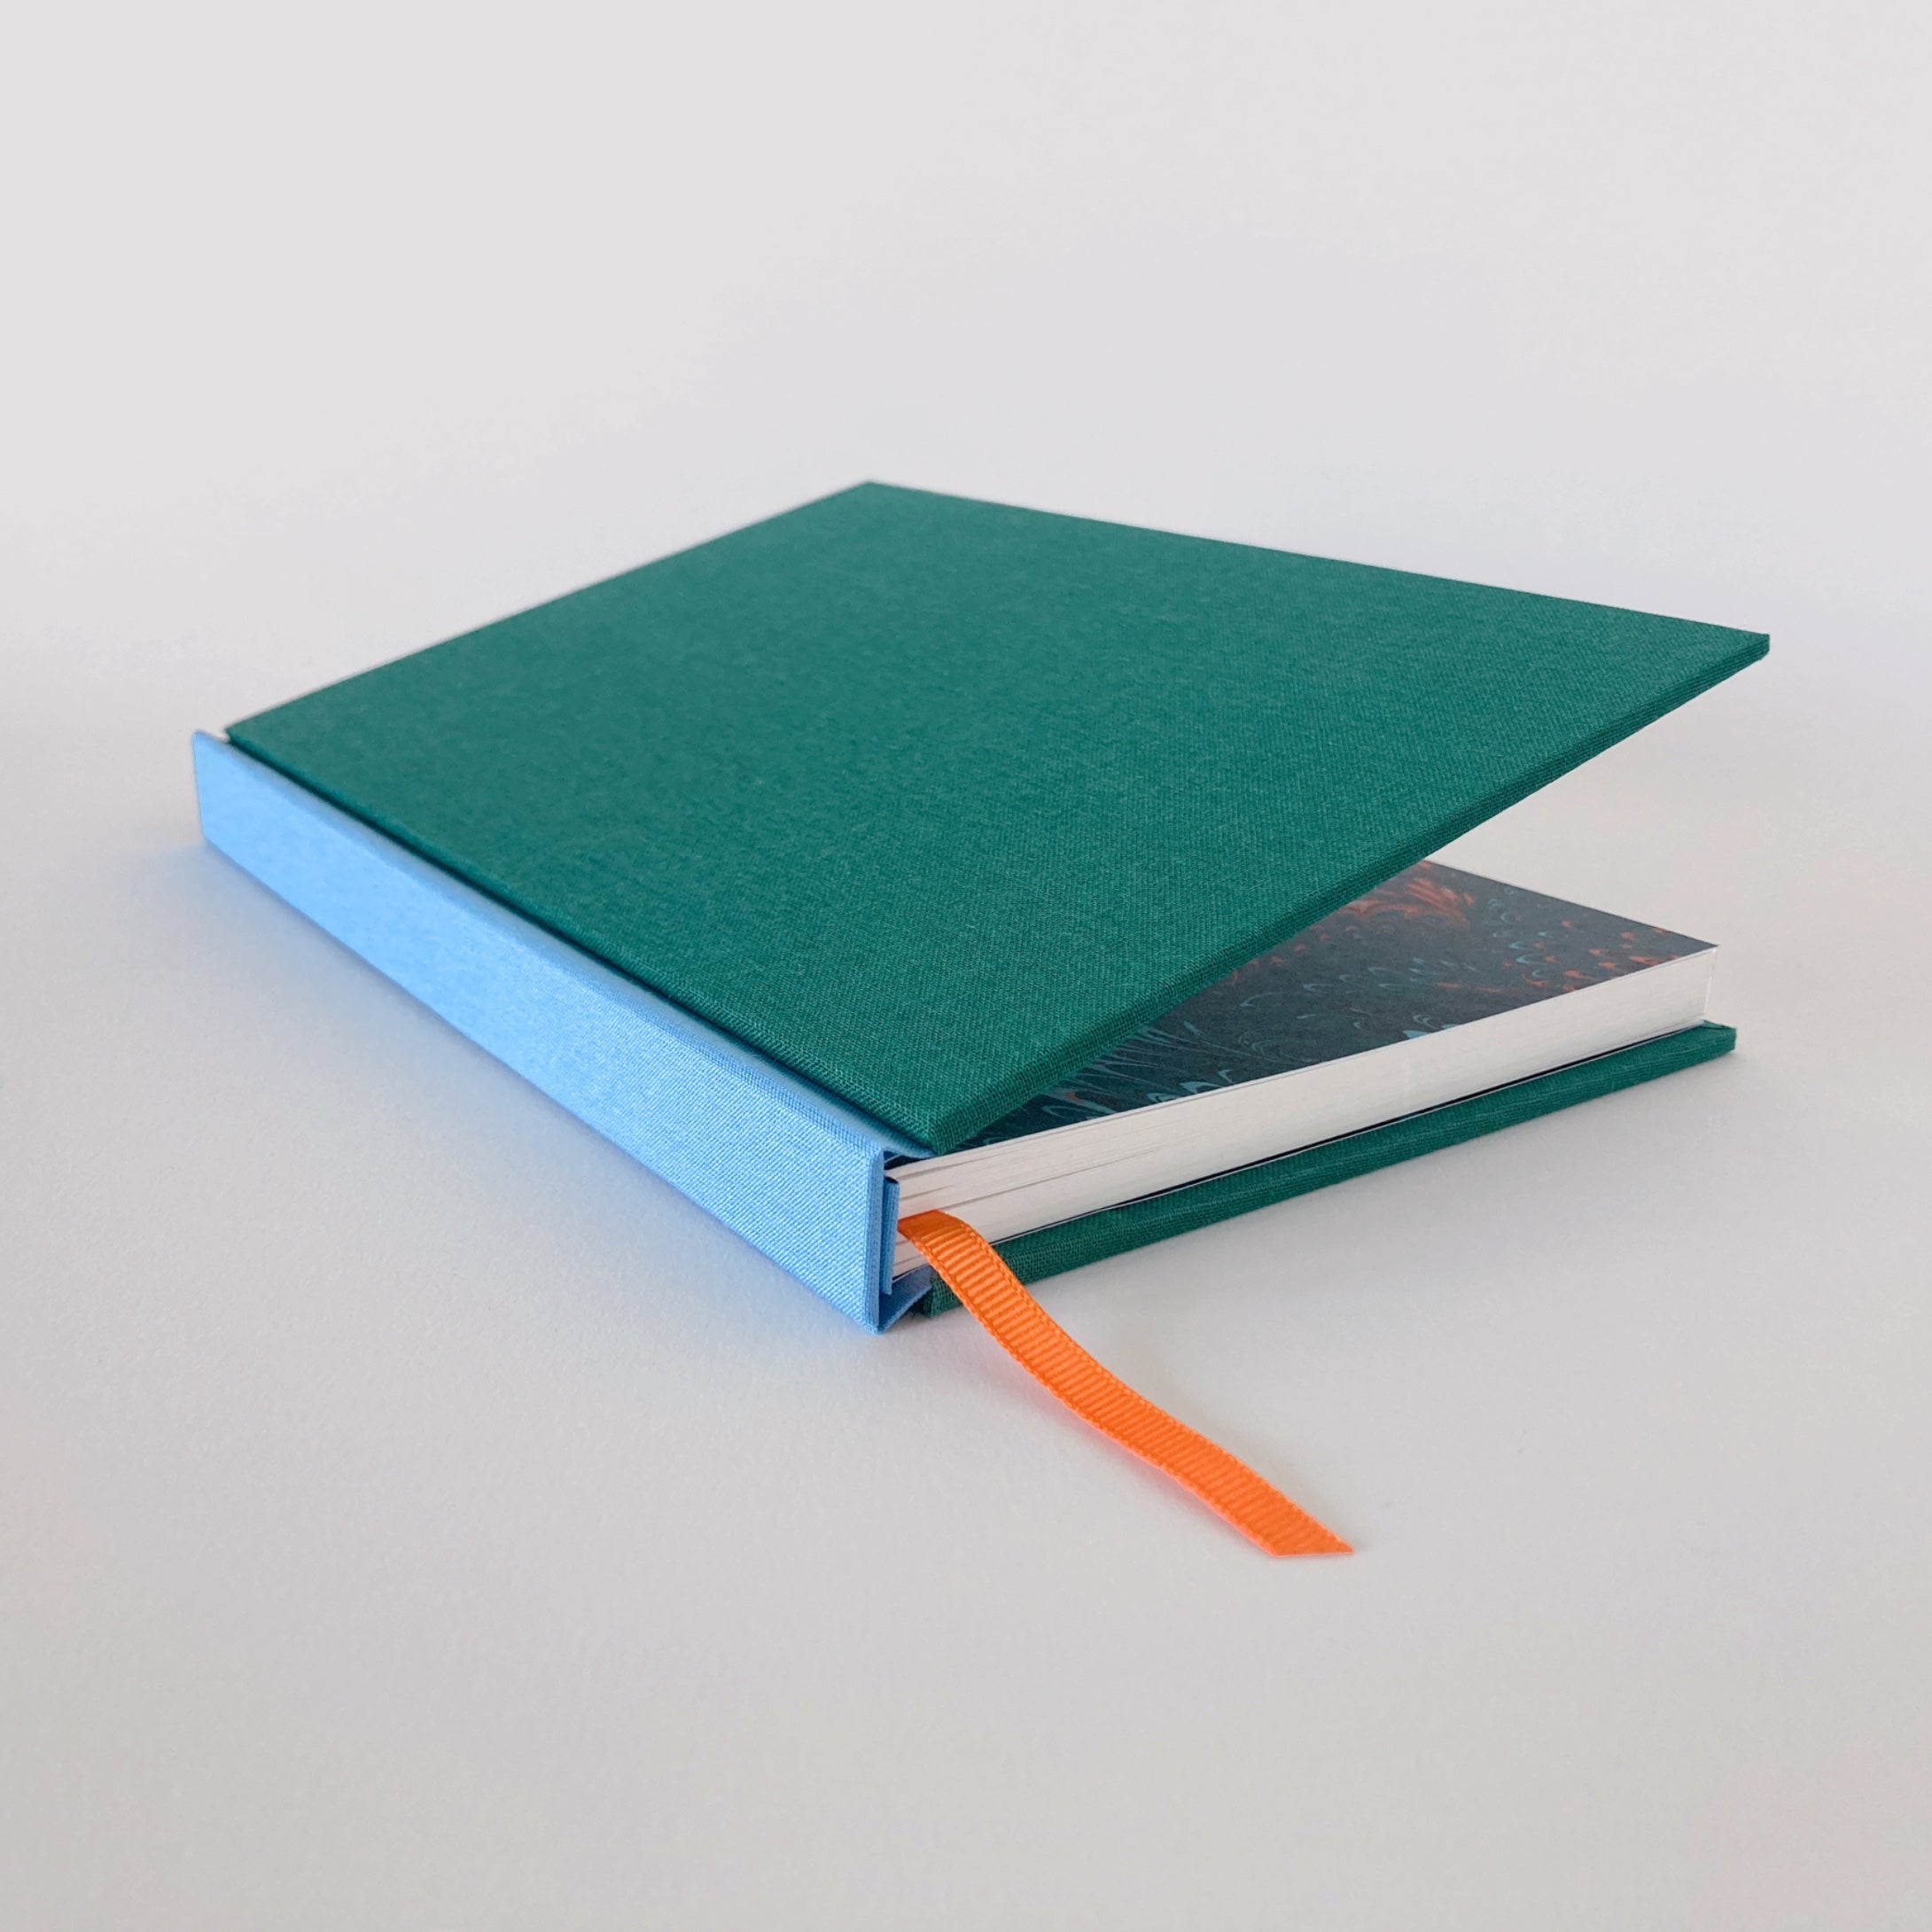 Green and blue hardback sketchbook partially open, revealing marble endpapers.